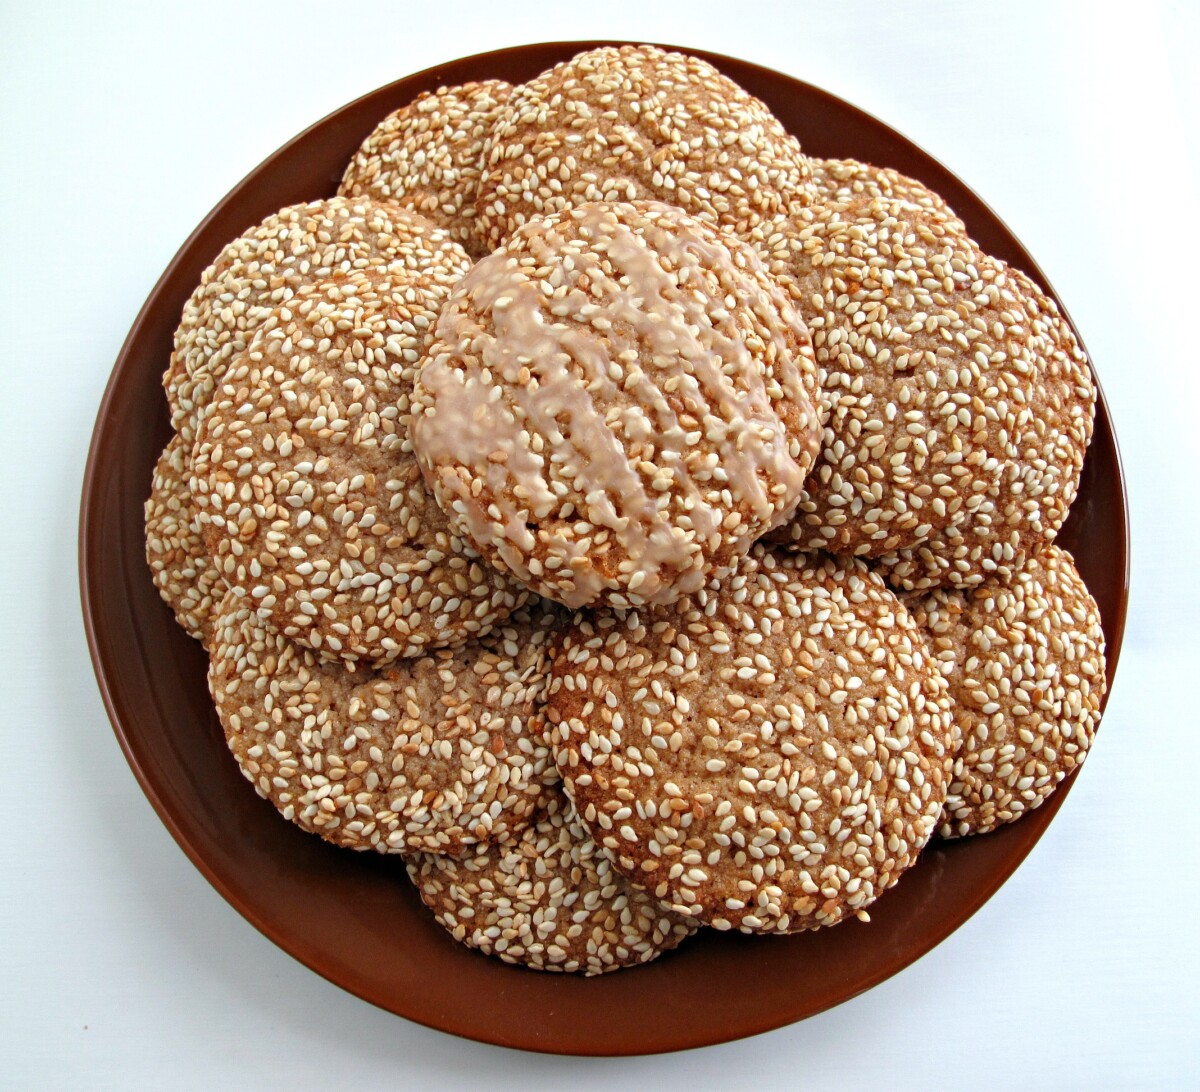 Sesame seed covered cookies on a brown serving plate.